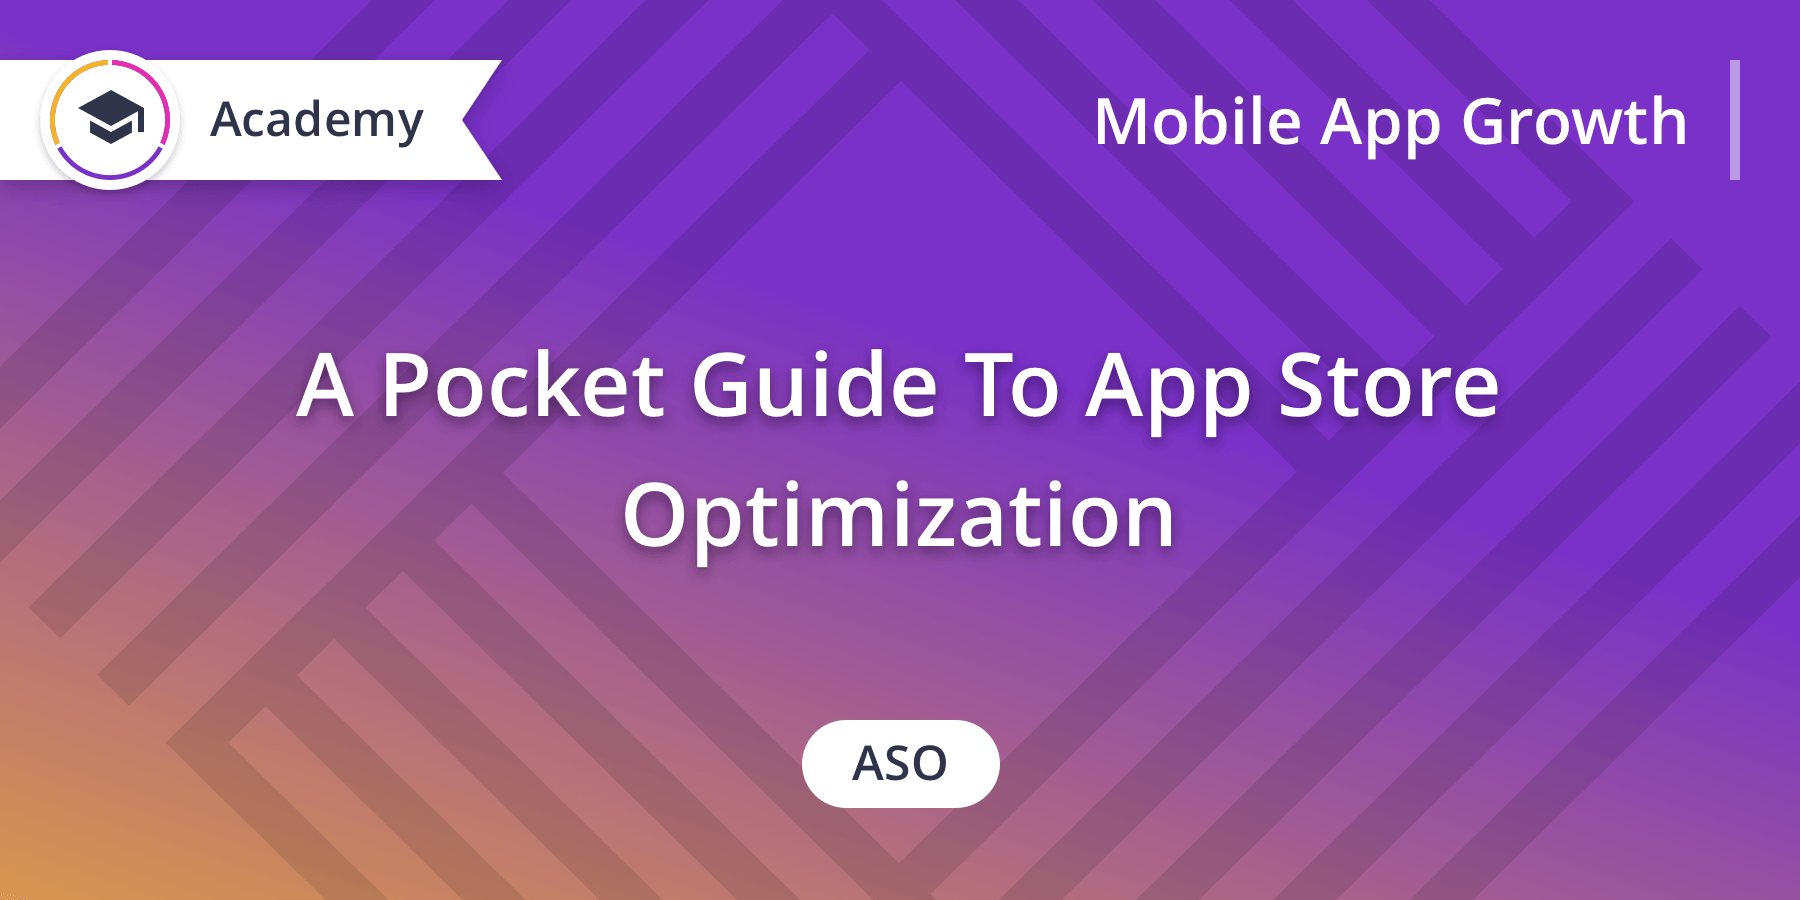 A Pocket Guide To App Store Optimization